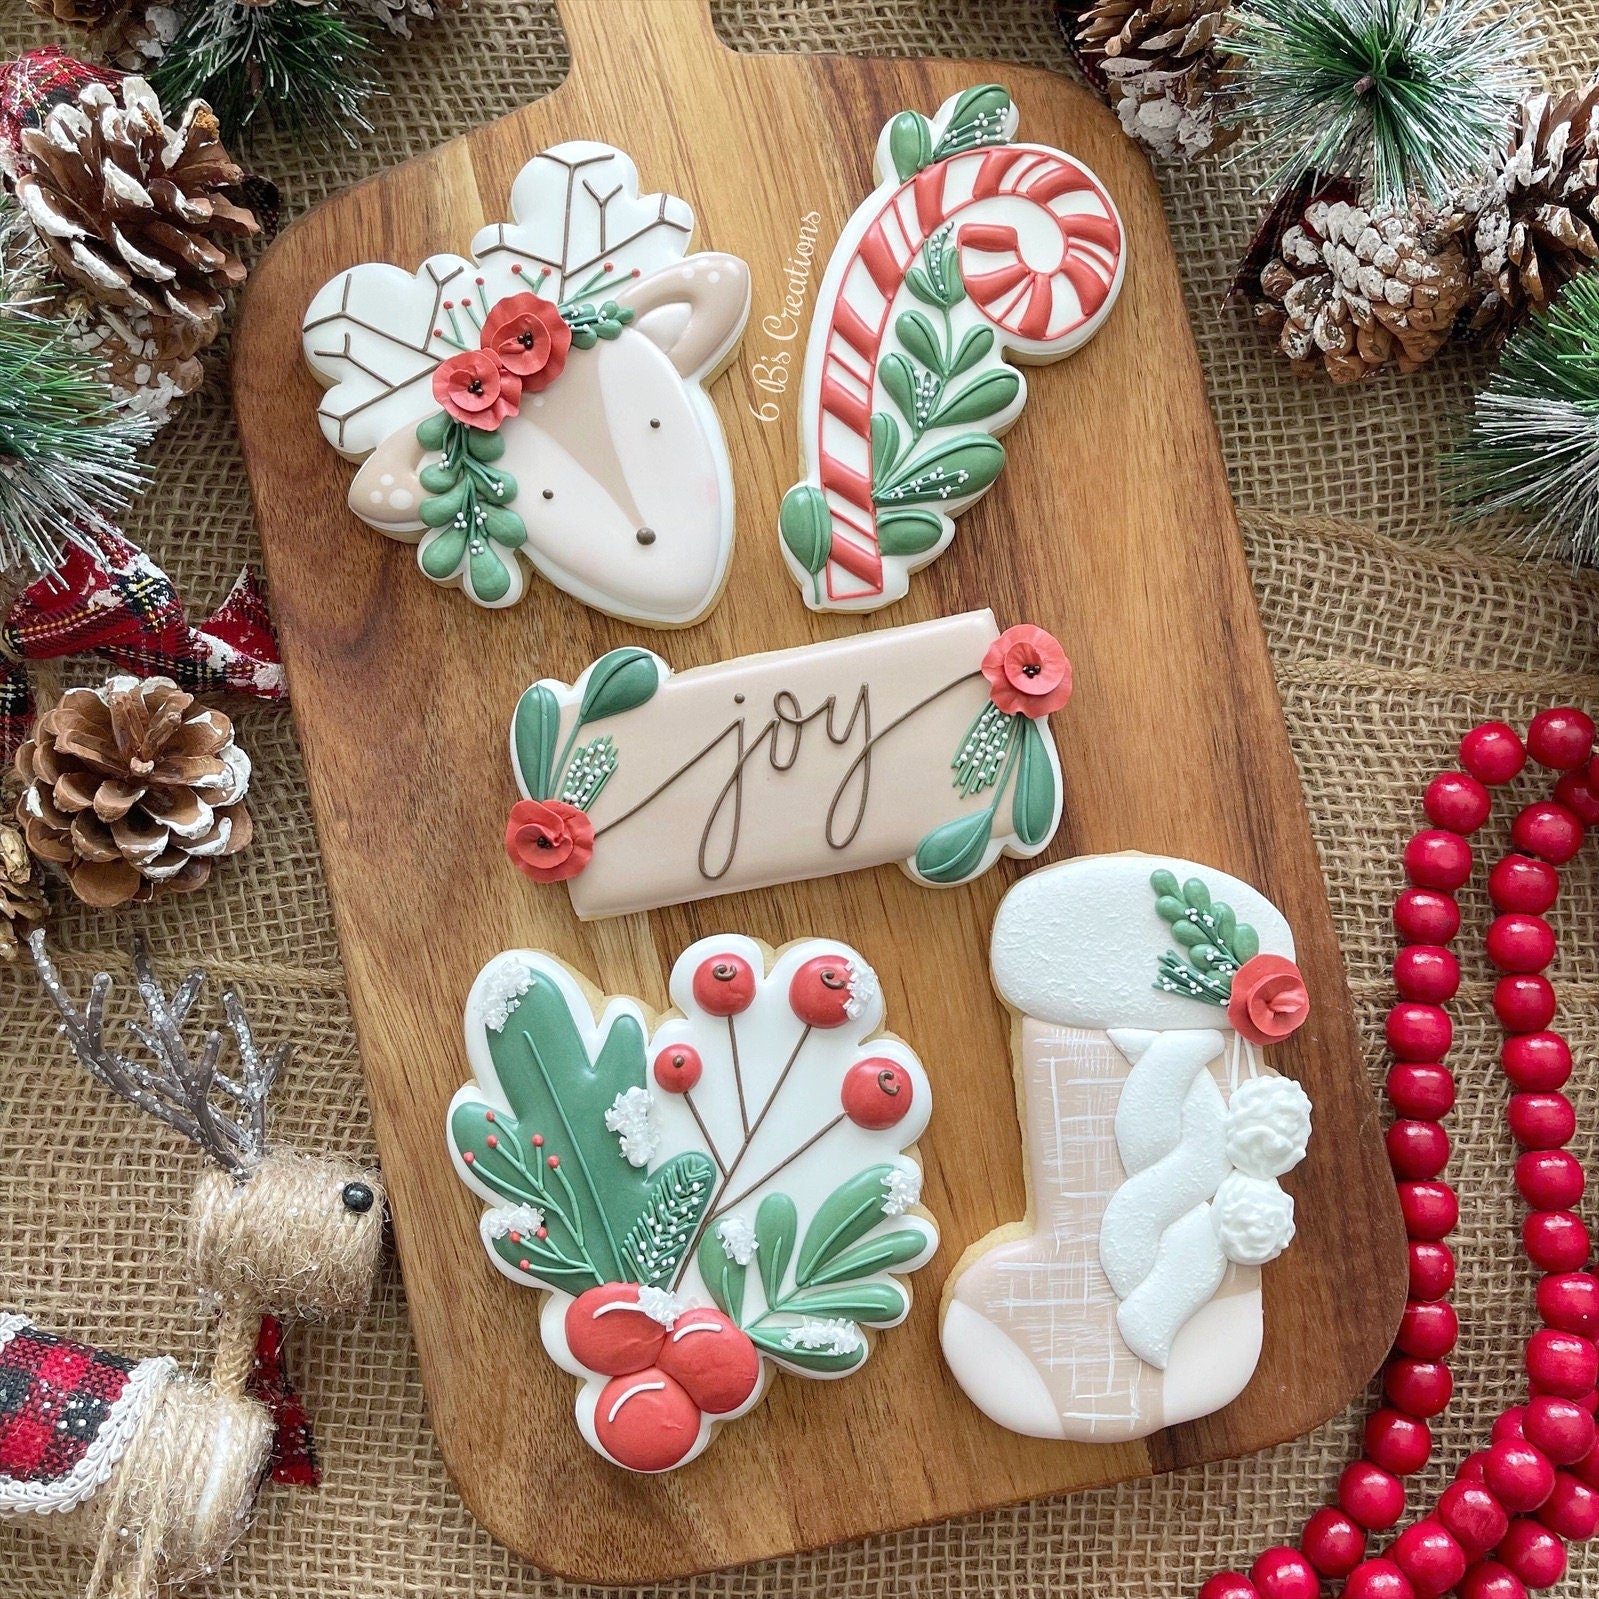 HOLIDAY EDITION Cookie Box Cutter Set, Clay Cutters